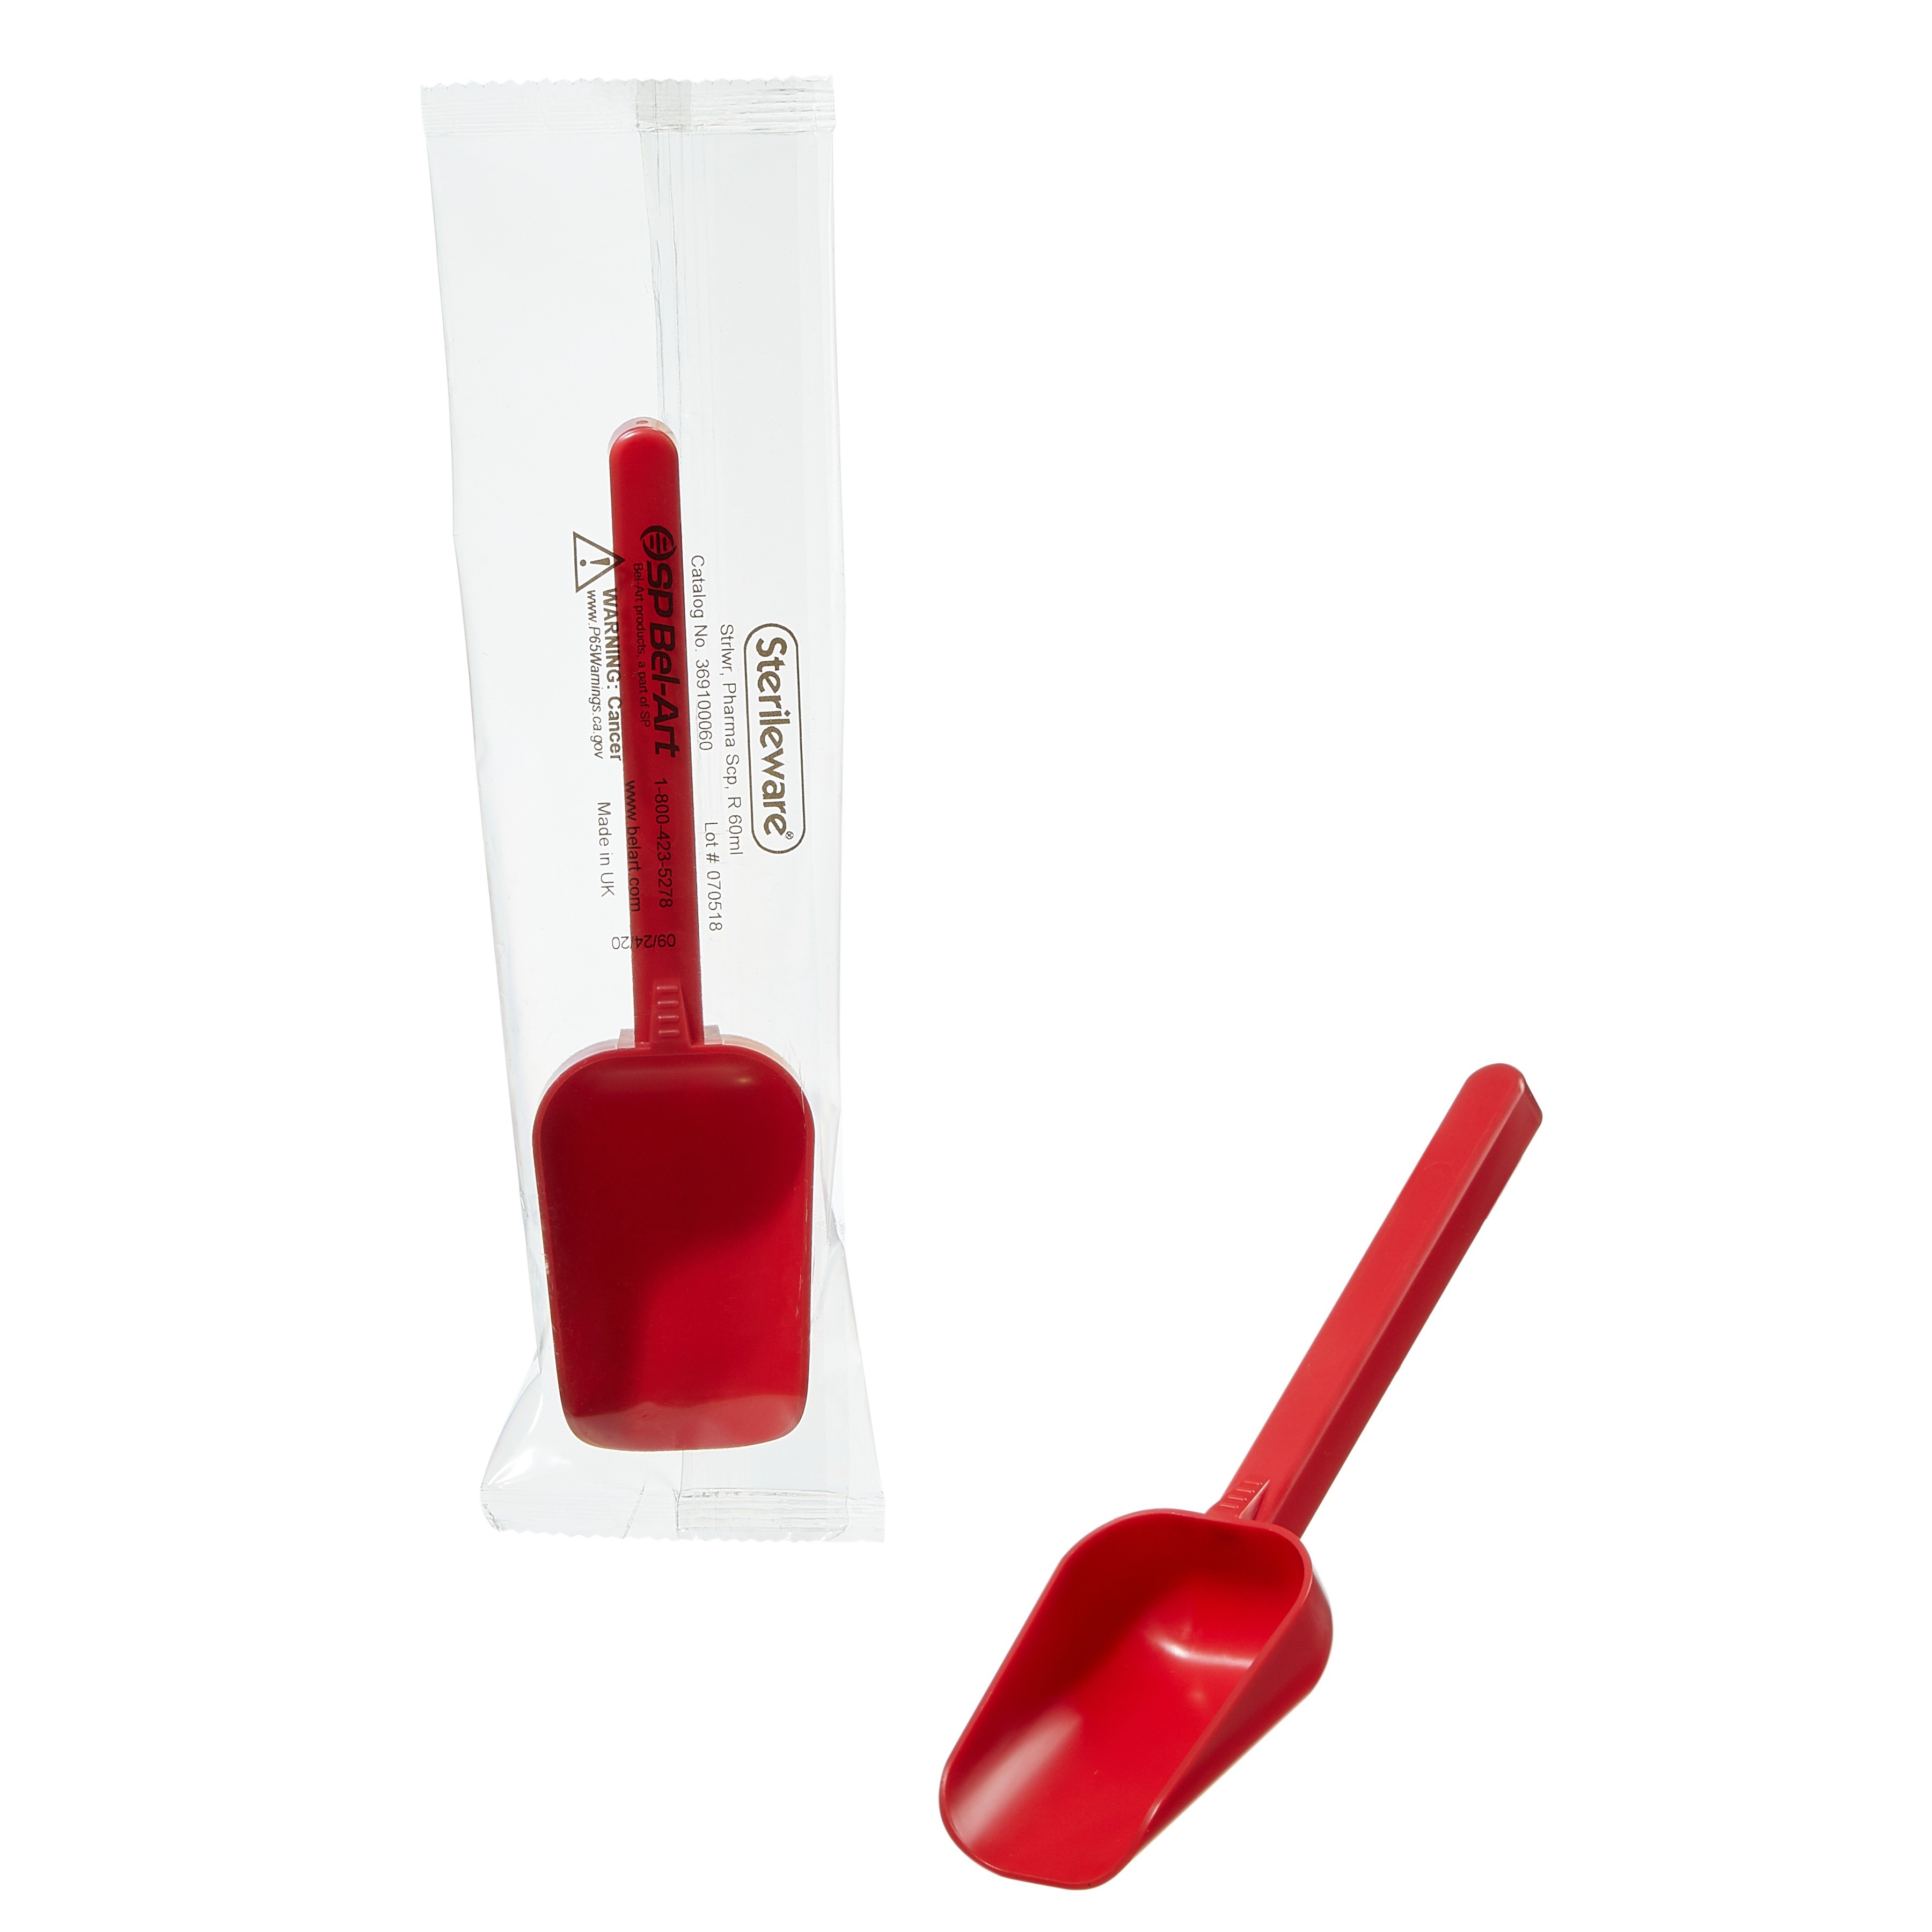 Sterileware Pharma Scoops - Red; 60ml (2oz), Individually Wrapped (Pack of 100)